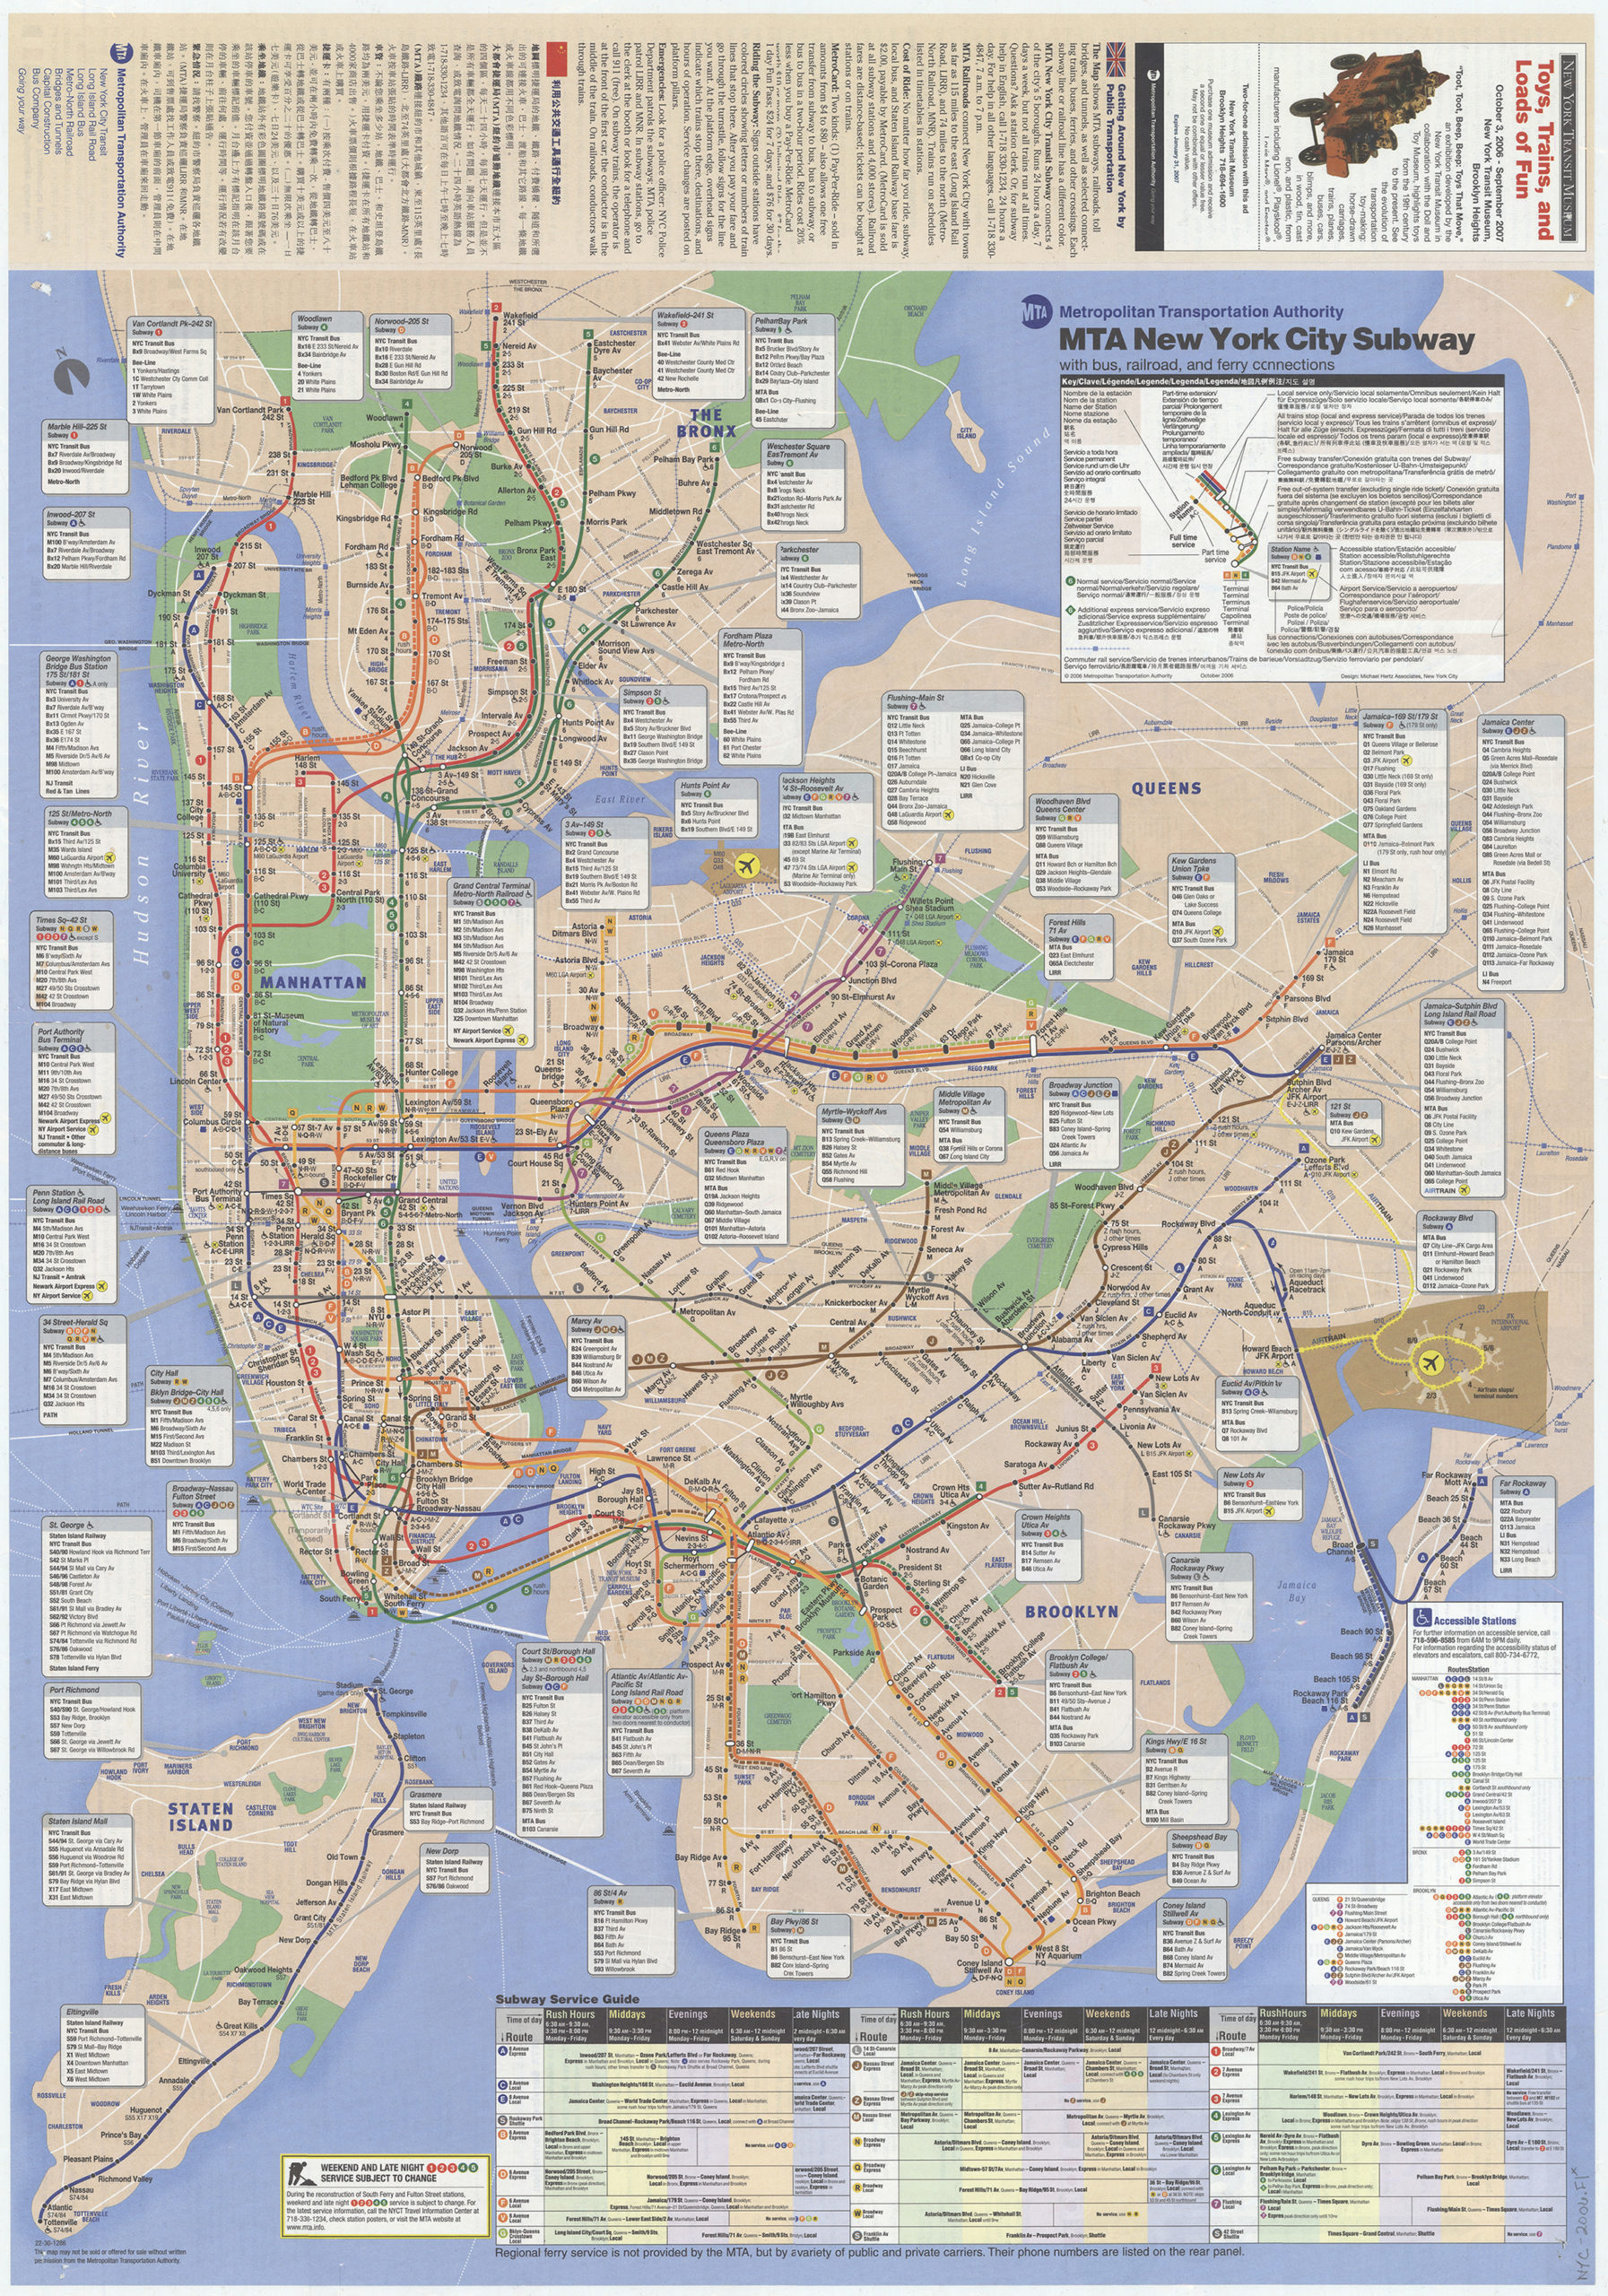 The map: MTA subways and railroads, plus bus connections: MTA